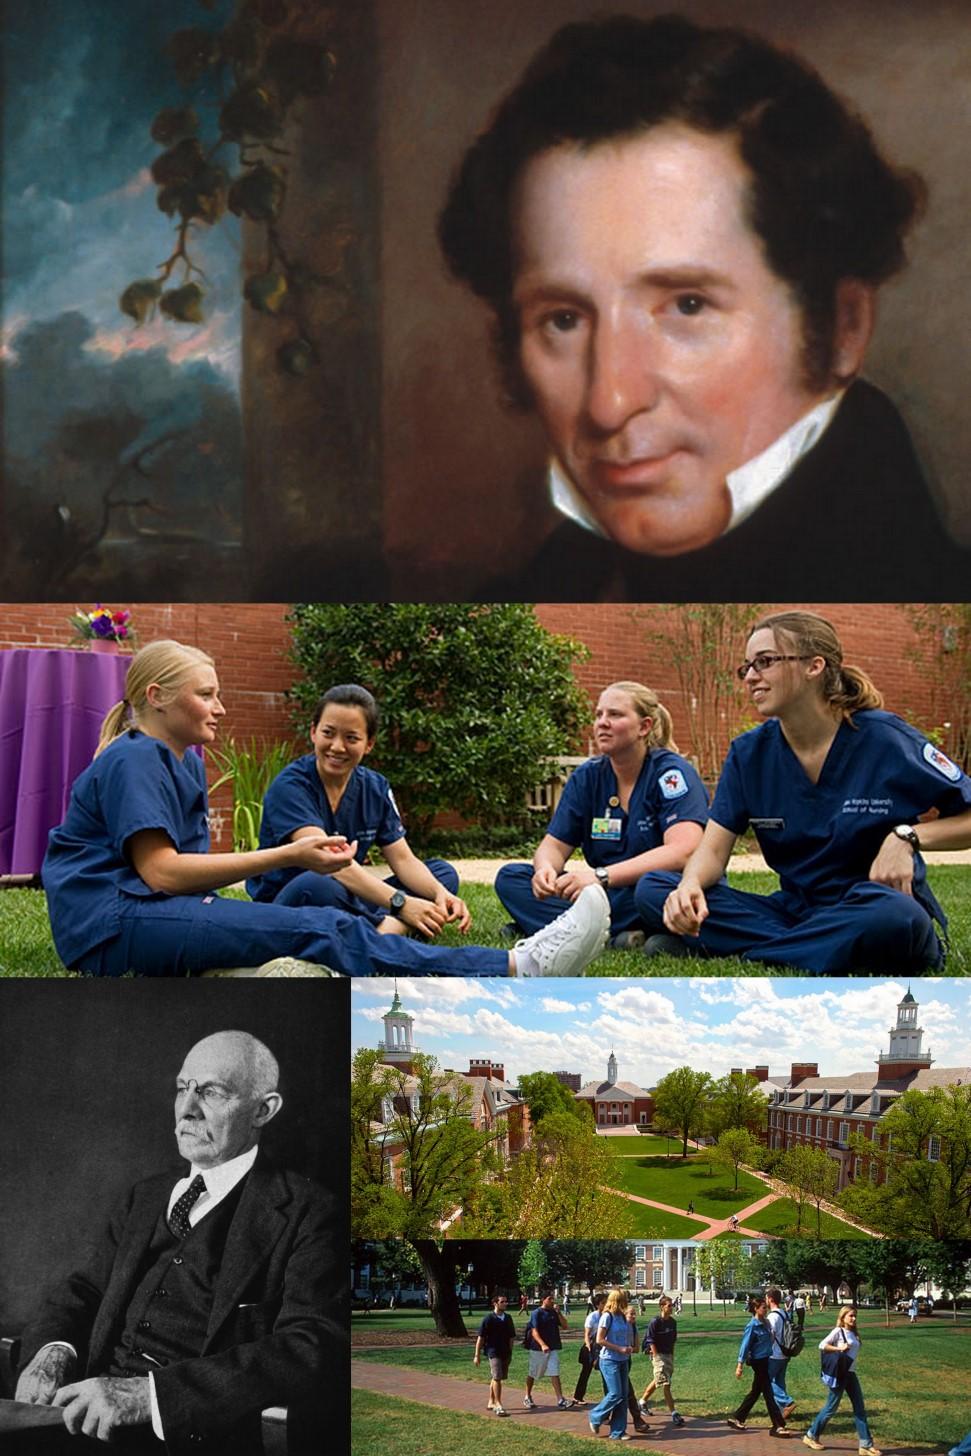 The Johns Hopkins University opened in 1876 as America s first research university, founded for the express purpose of expanding knowledge and putting that knowledge to work for the good of humanity.